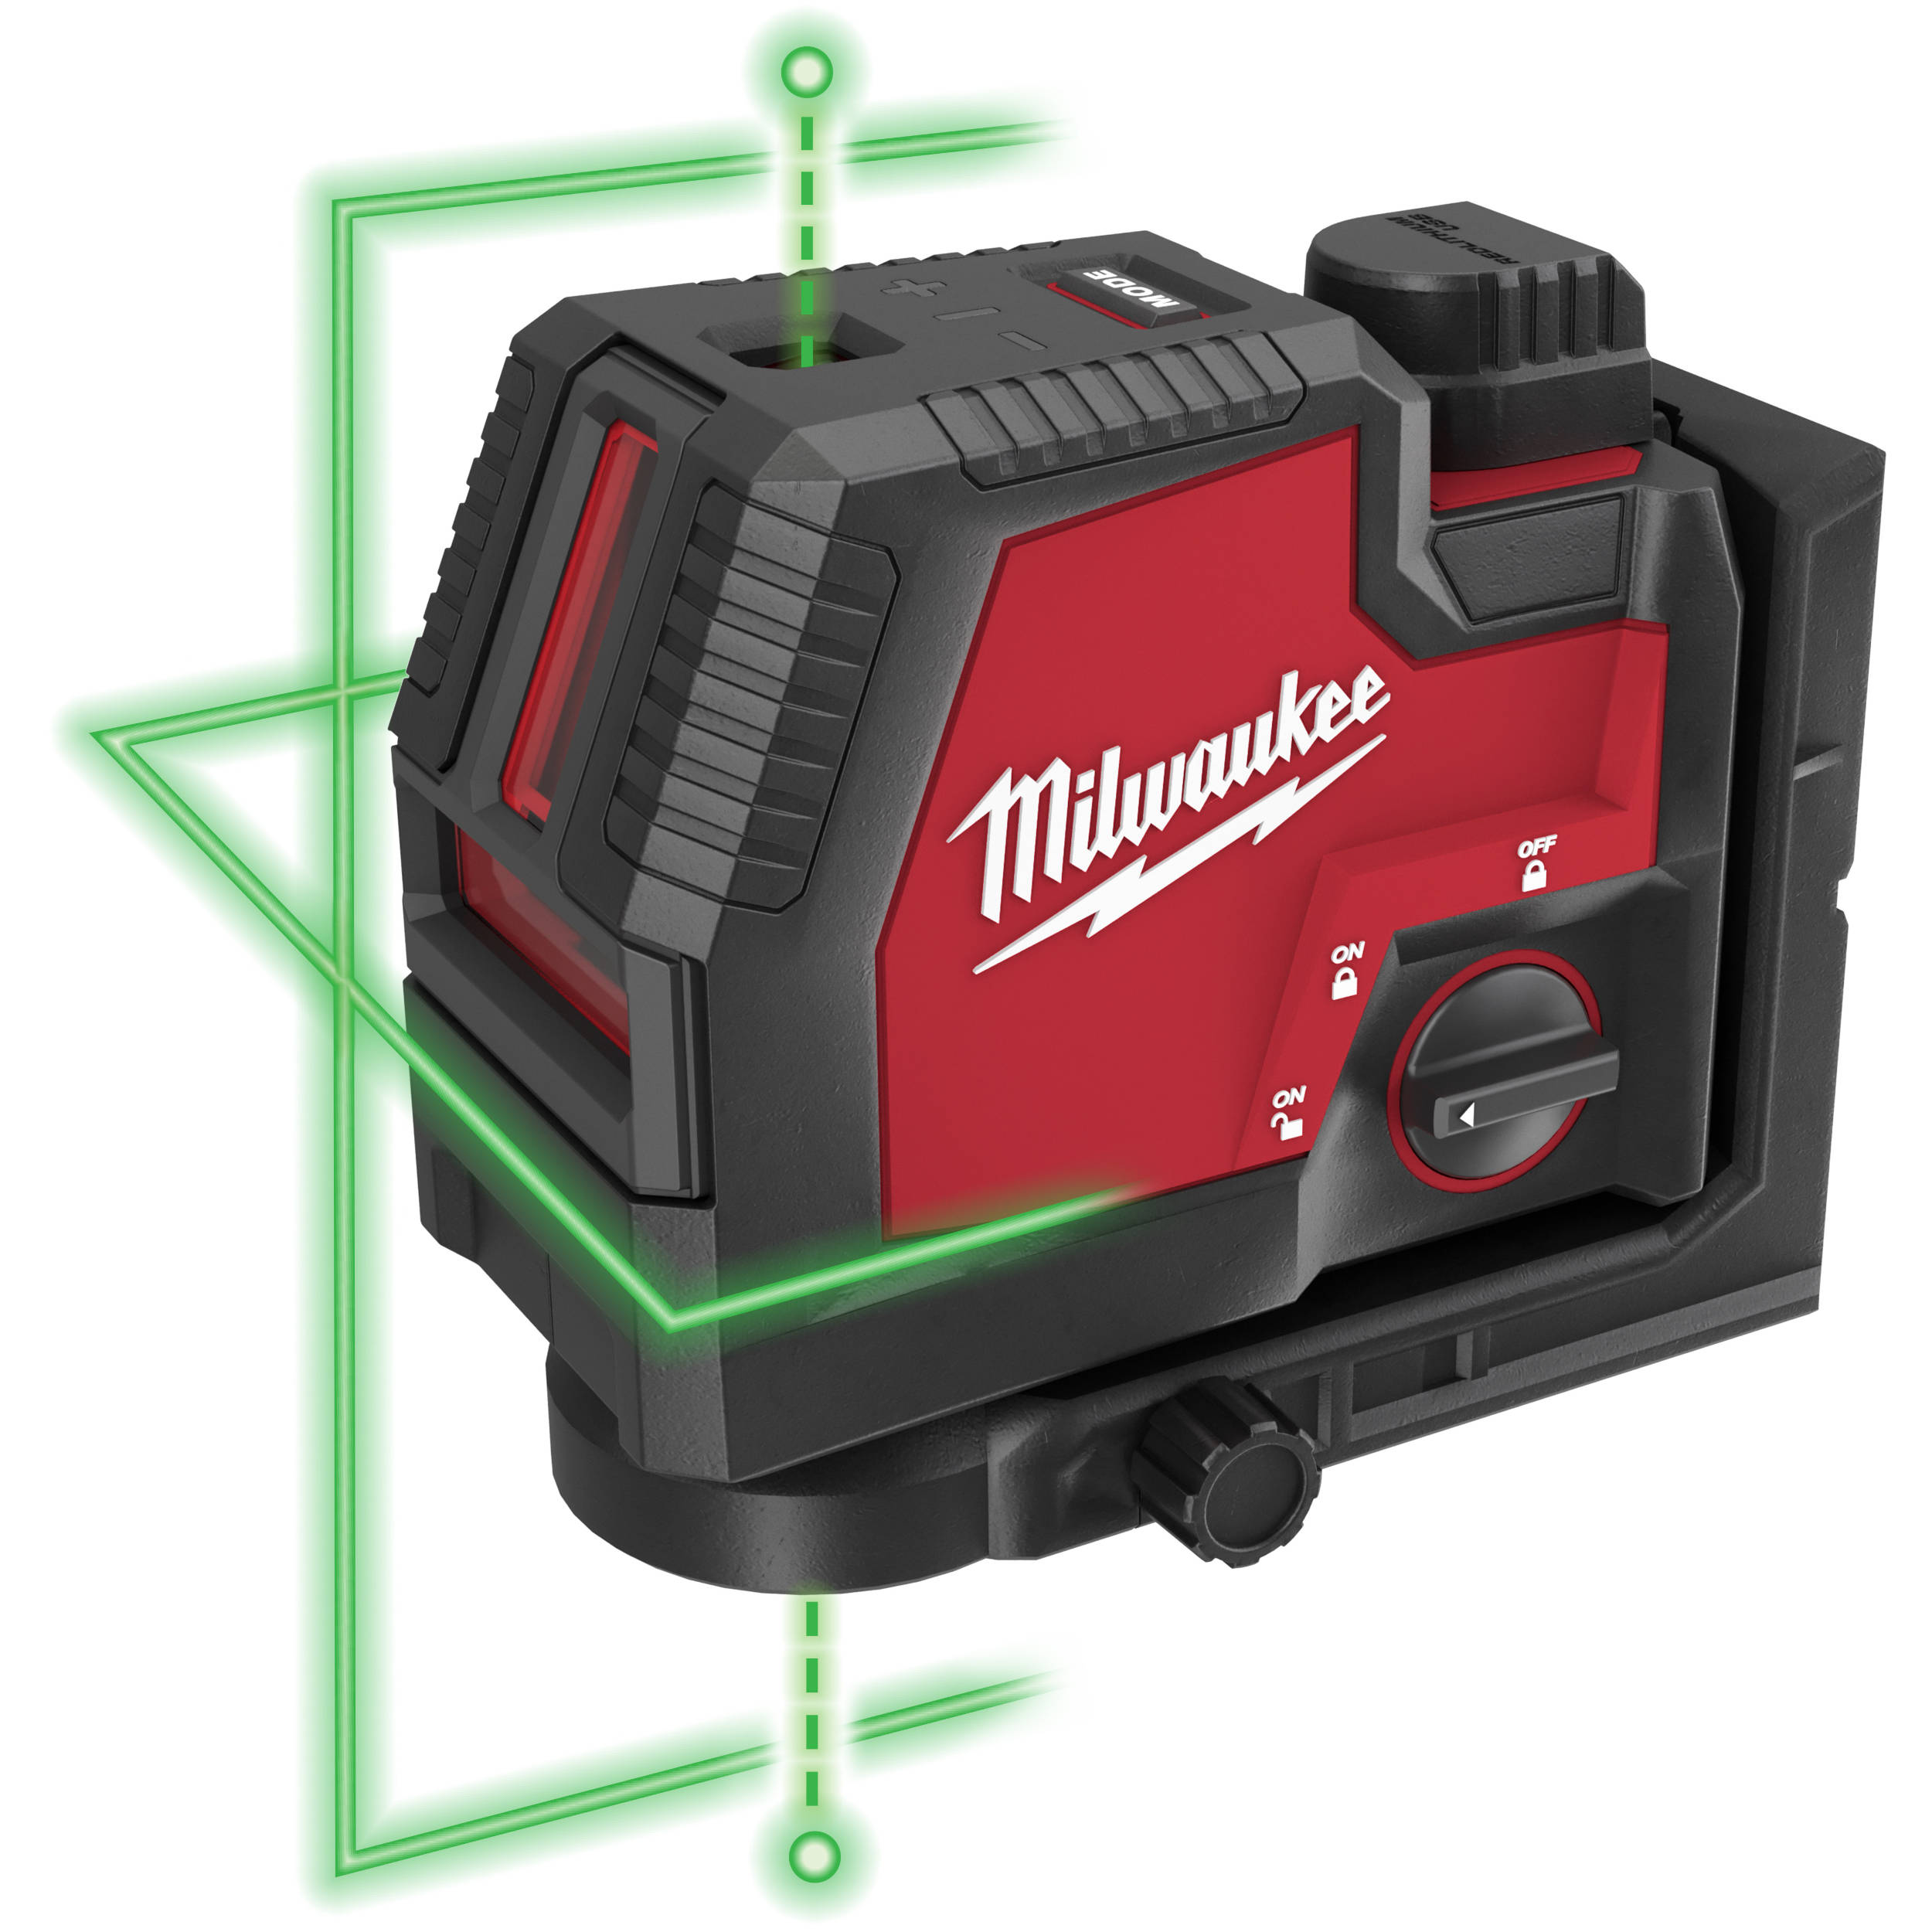 3522-21 Milwaukee USB Rechargeable Green Cross Line & Plumb Points Laser 7